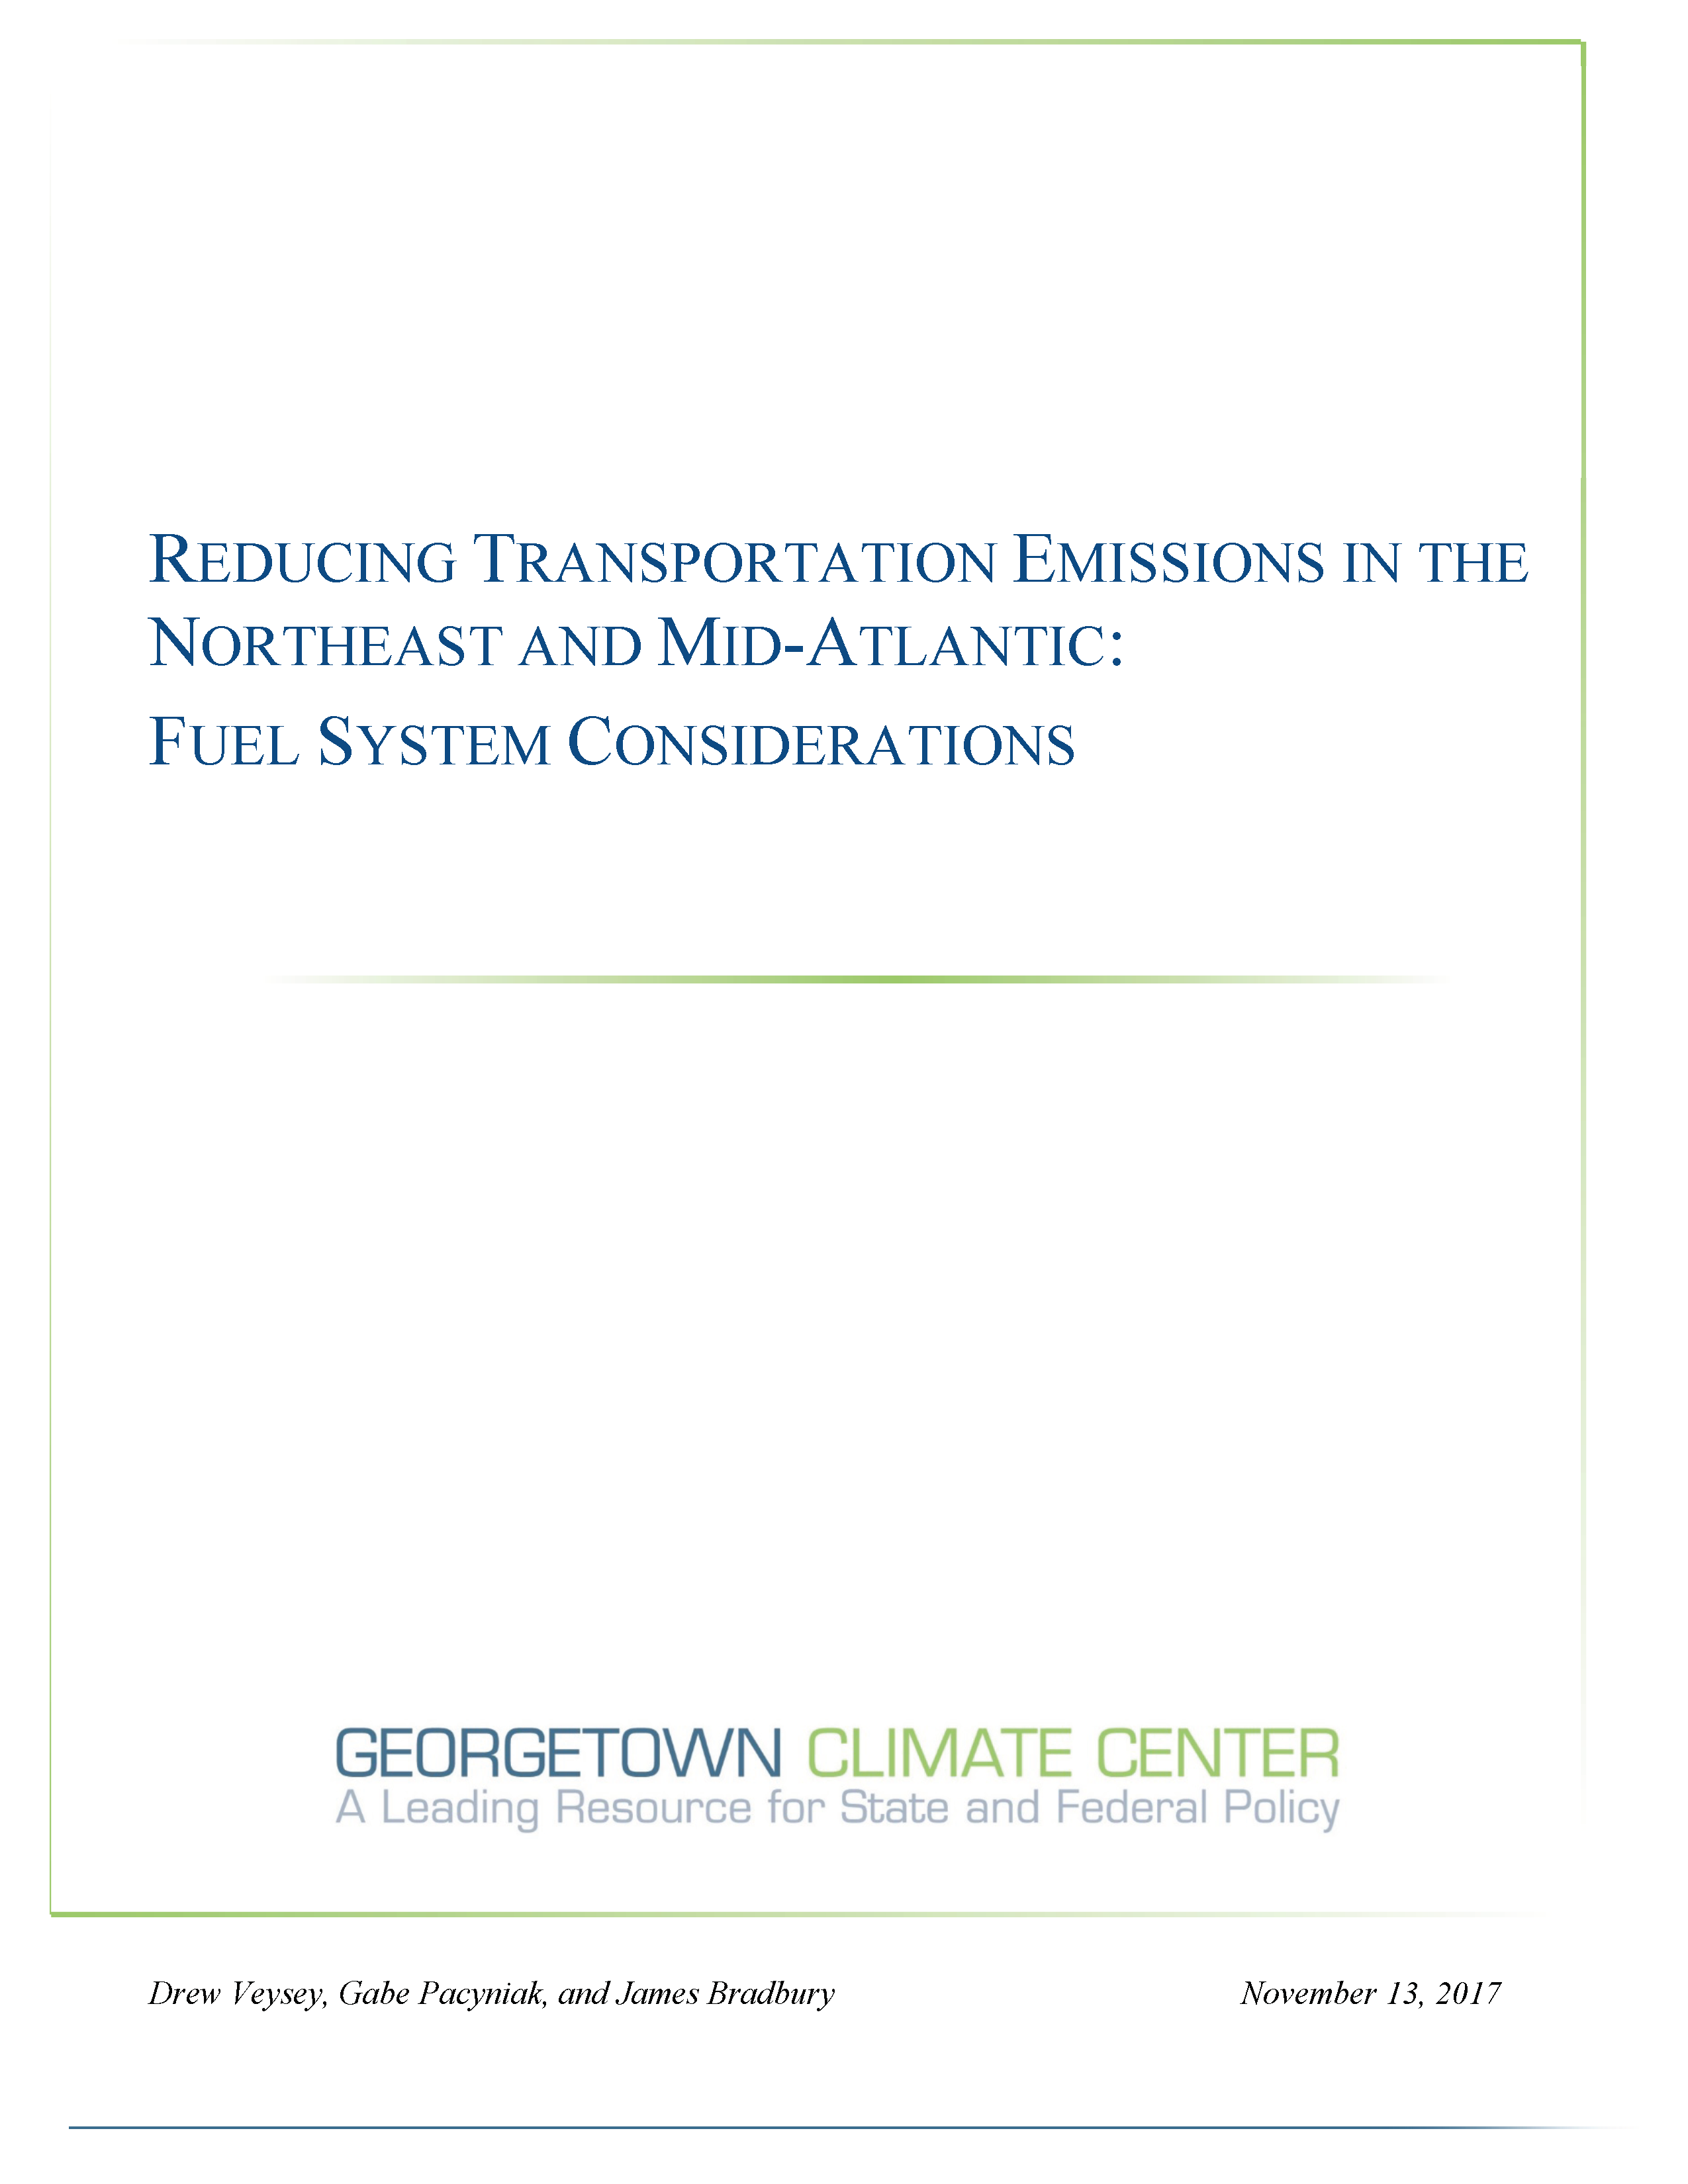 Reducing Transportation Emissions in the Northeast and Mid-Atlantic: Fuel System Considerations